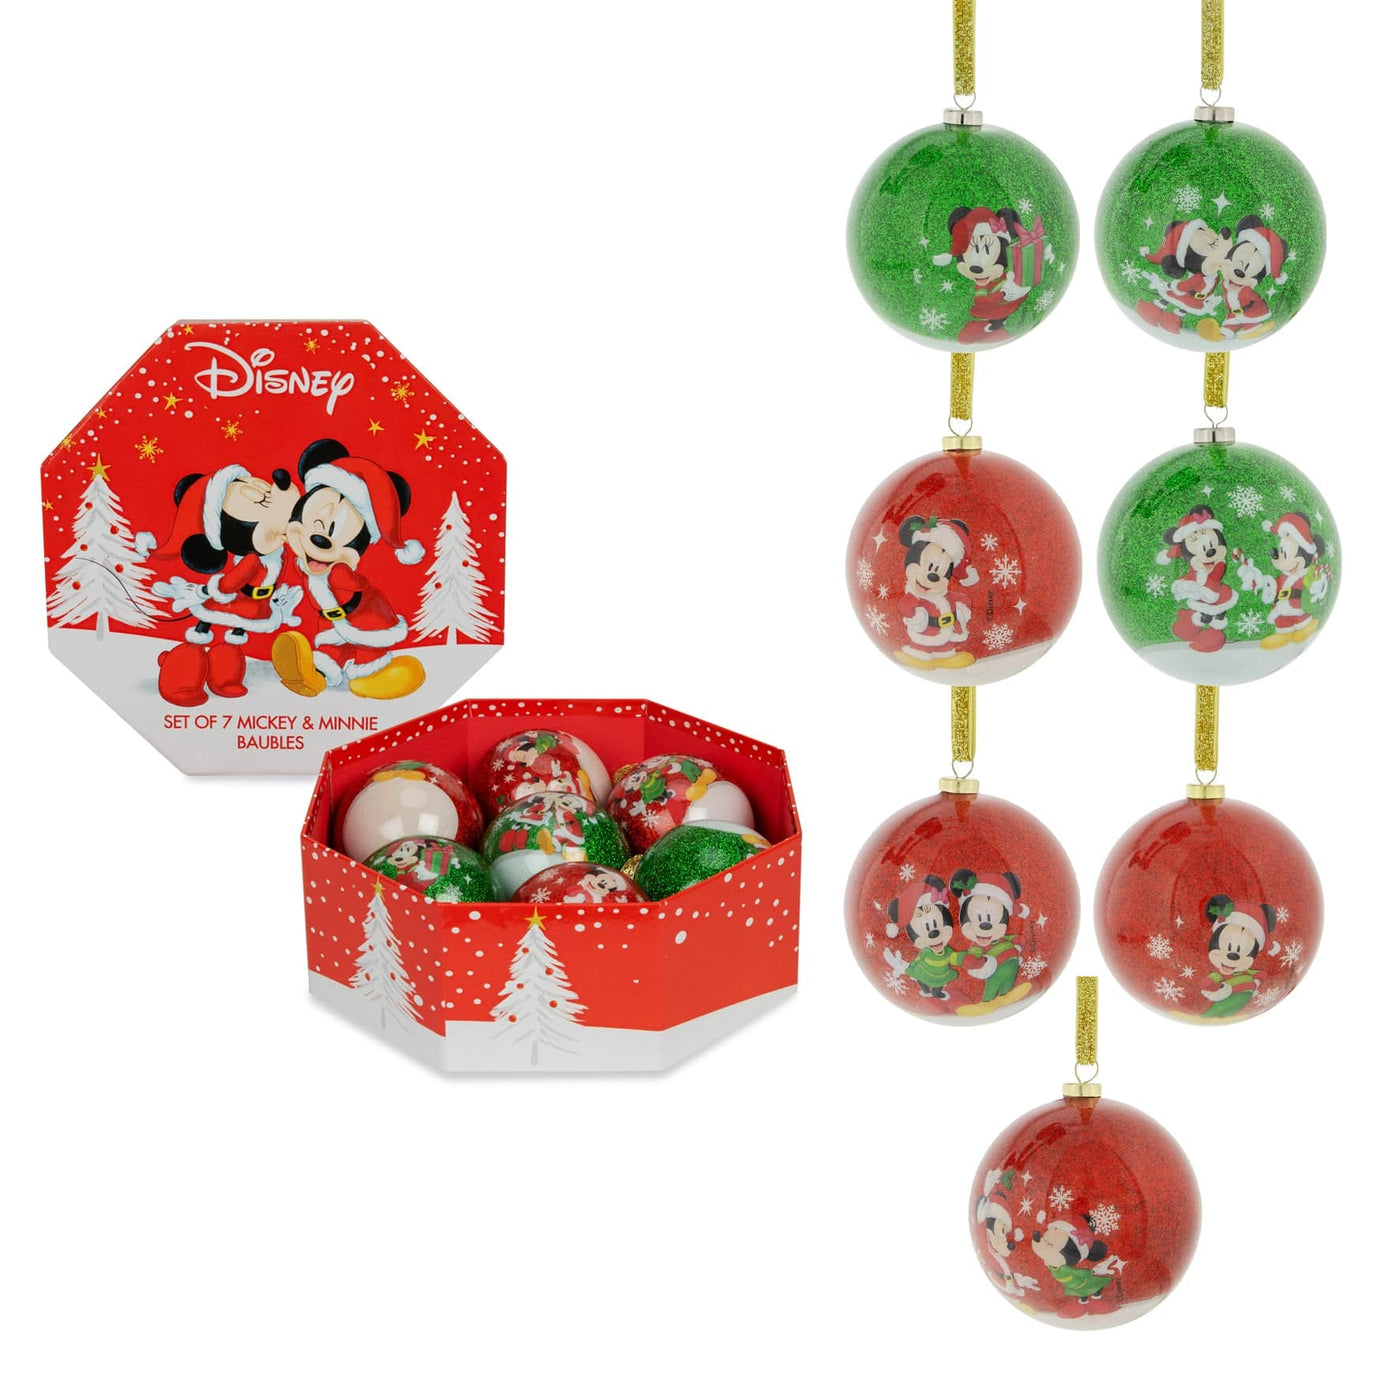 Widdop Gifts Christmas Decorations Disney Mickey and Minnie Mouse Christmas Baubles